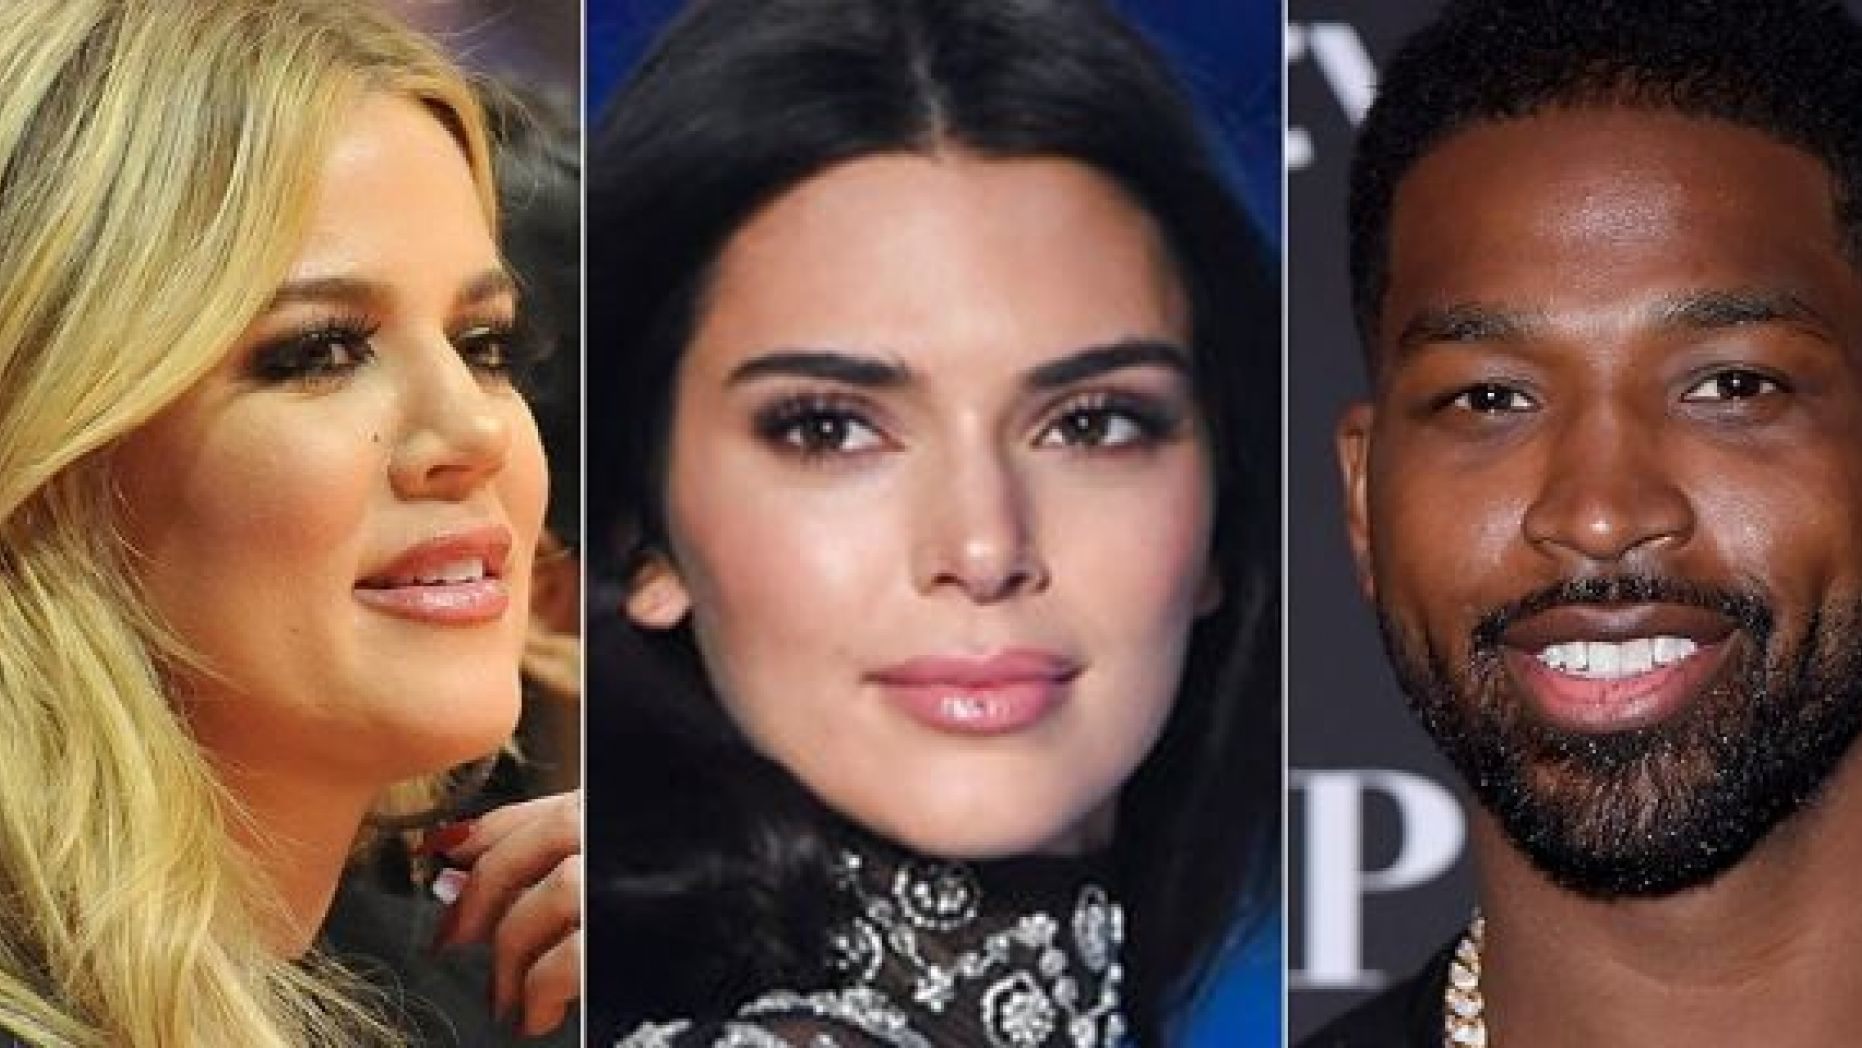 Khloe Kardashian defended her sister Kendall Jenner after she was caught booing Tristan Thompson.